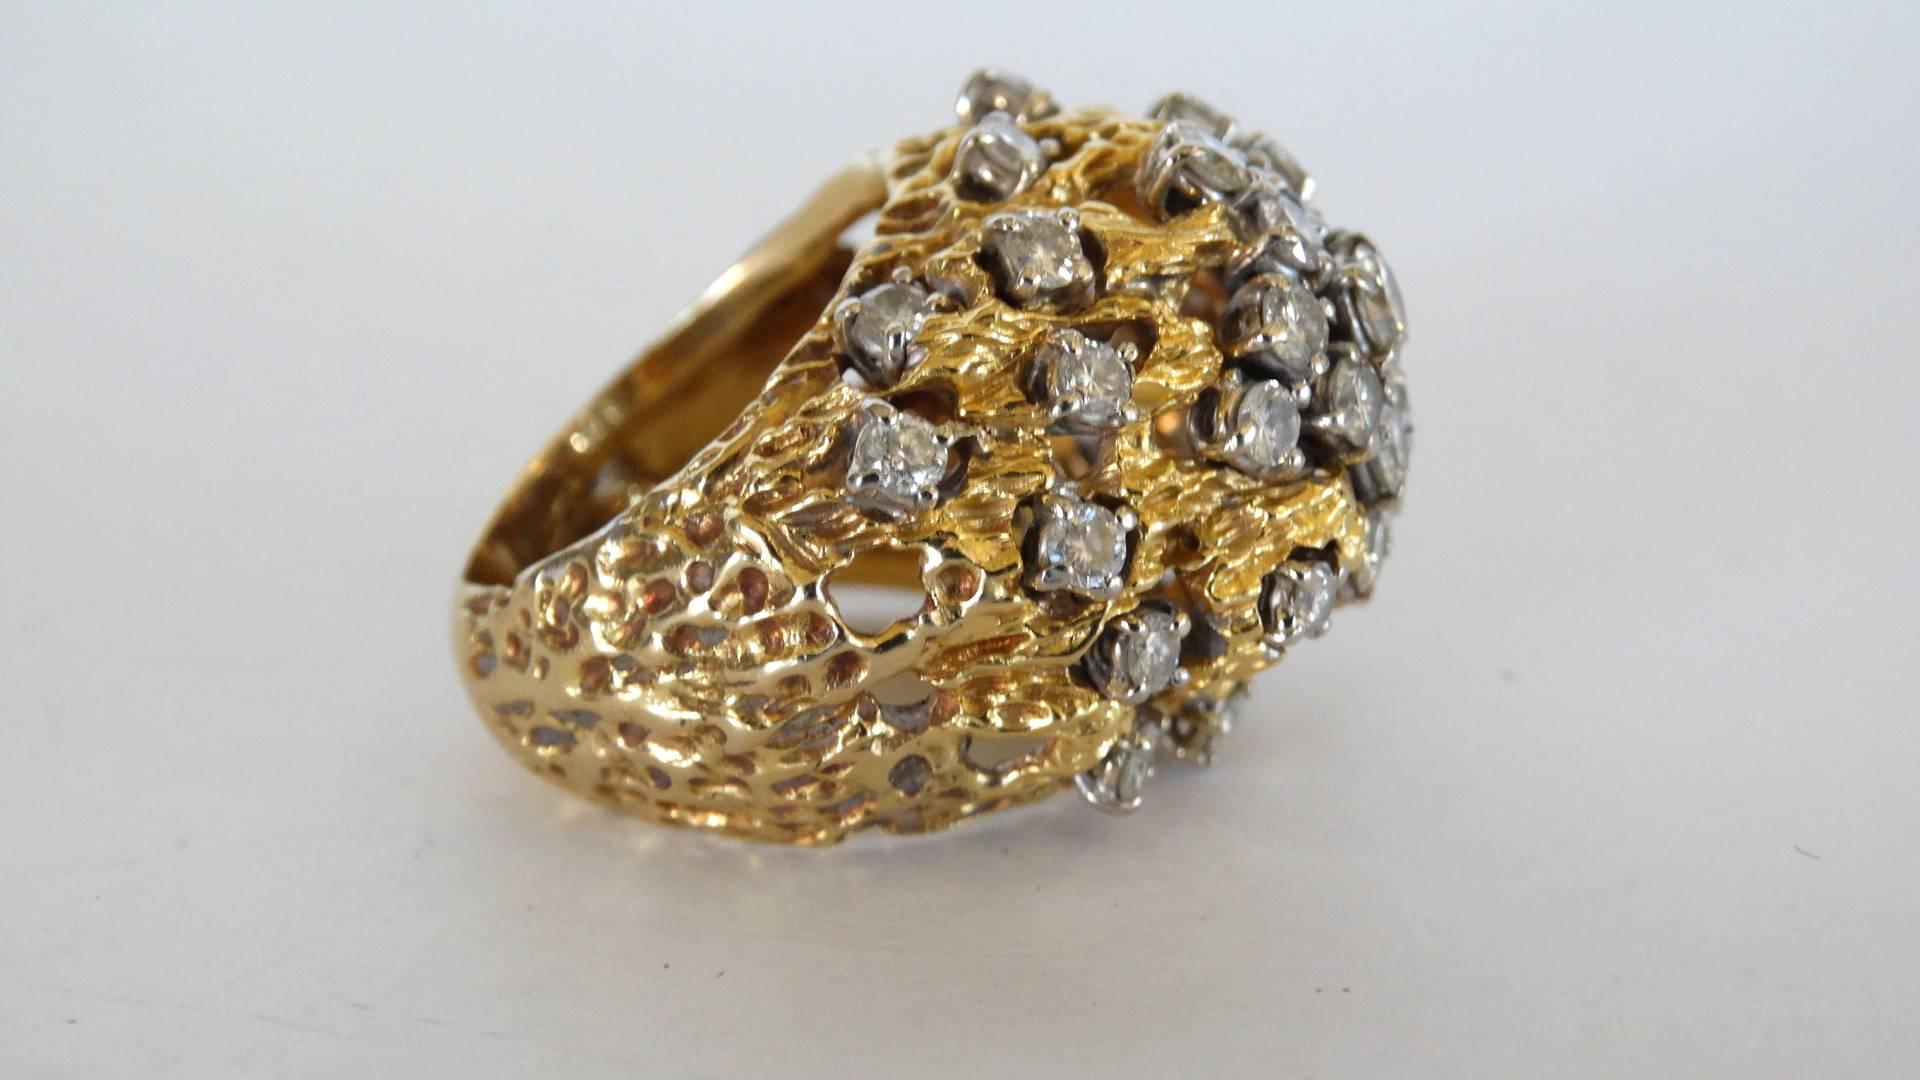 A beautiful custom made diamond nugget ring from the 70's. This ring has 3 carat weight of brilliant white diamonds and is set in 18k yellow gold. The ring is a size 6 Total gram weight is 16.74. 34 round brilliant cut diamonds. 